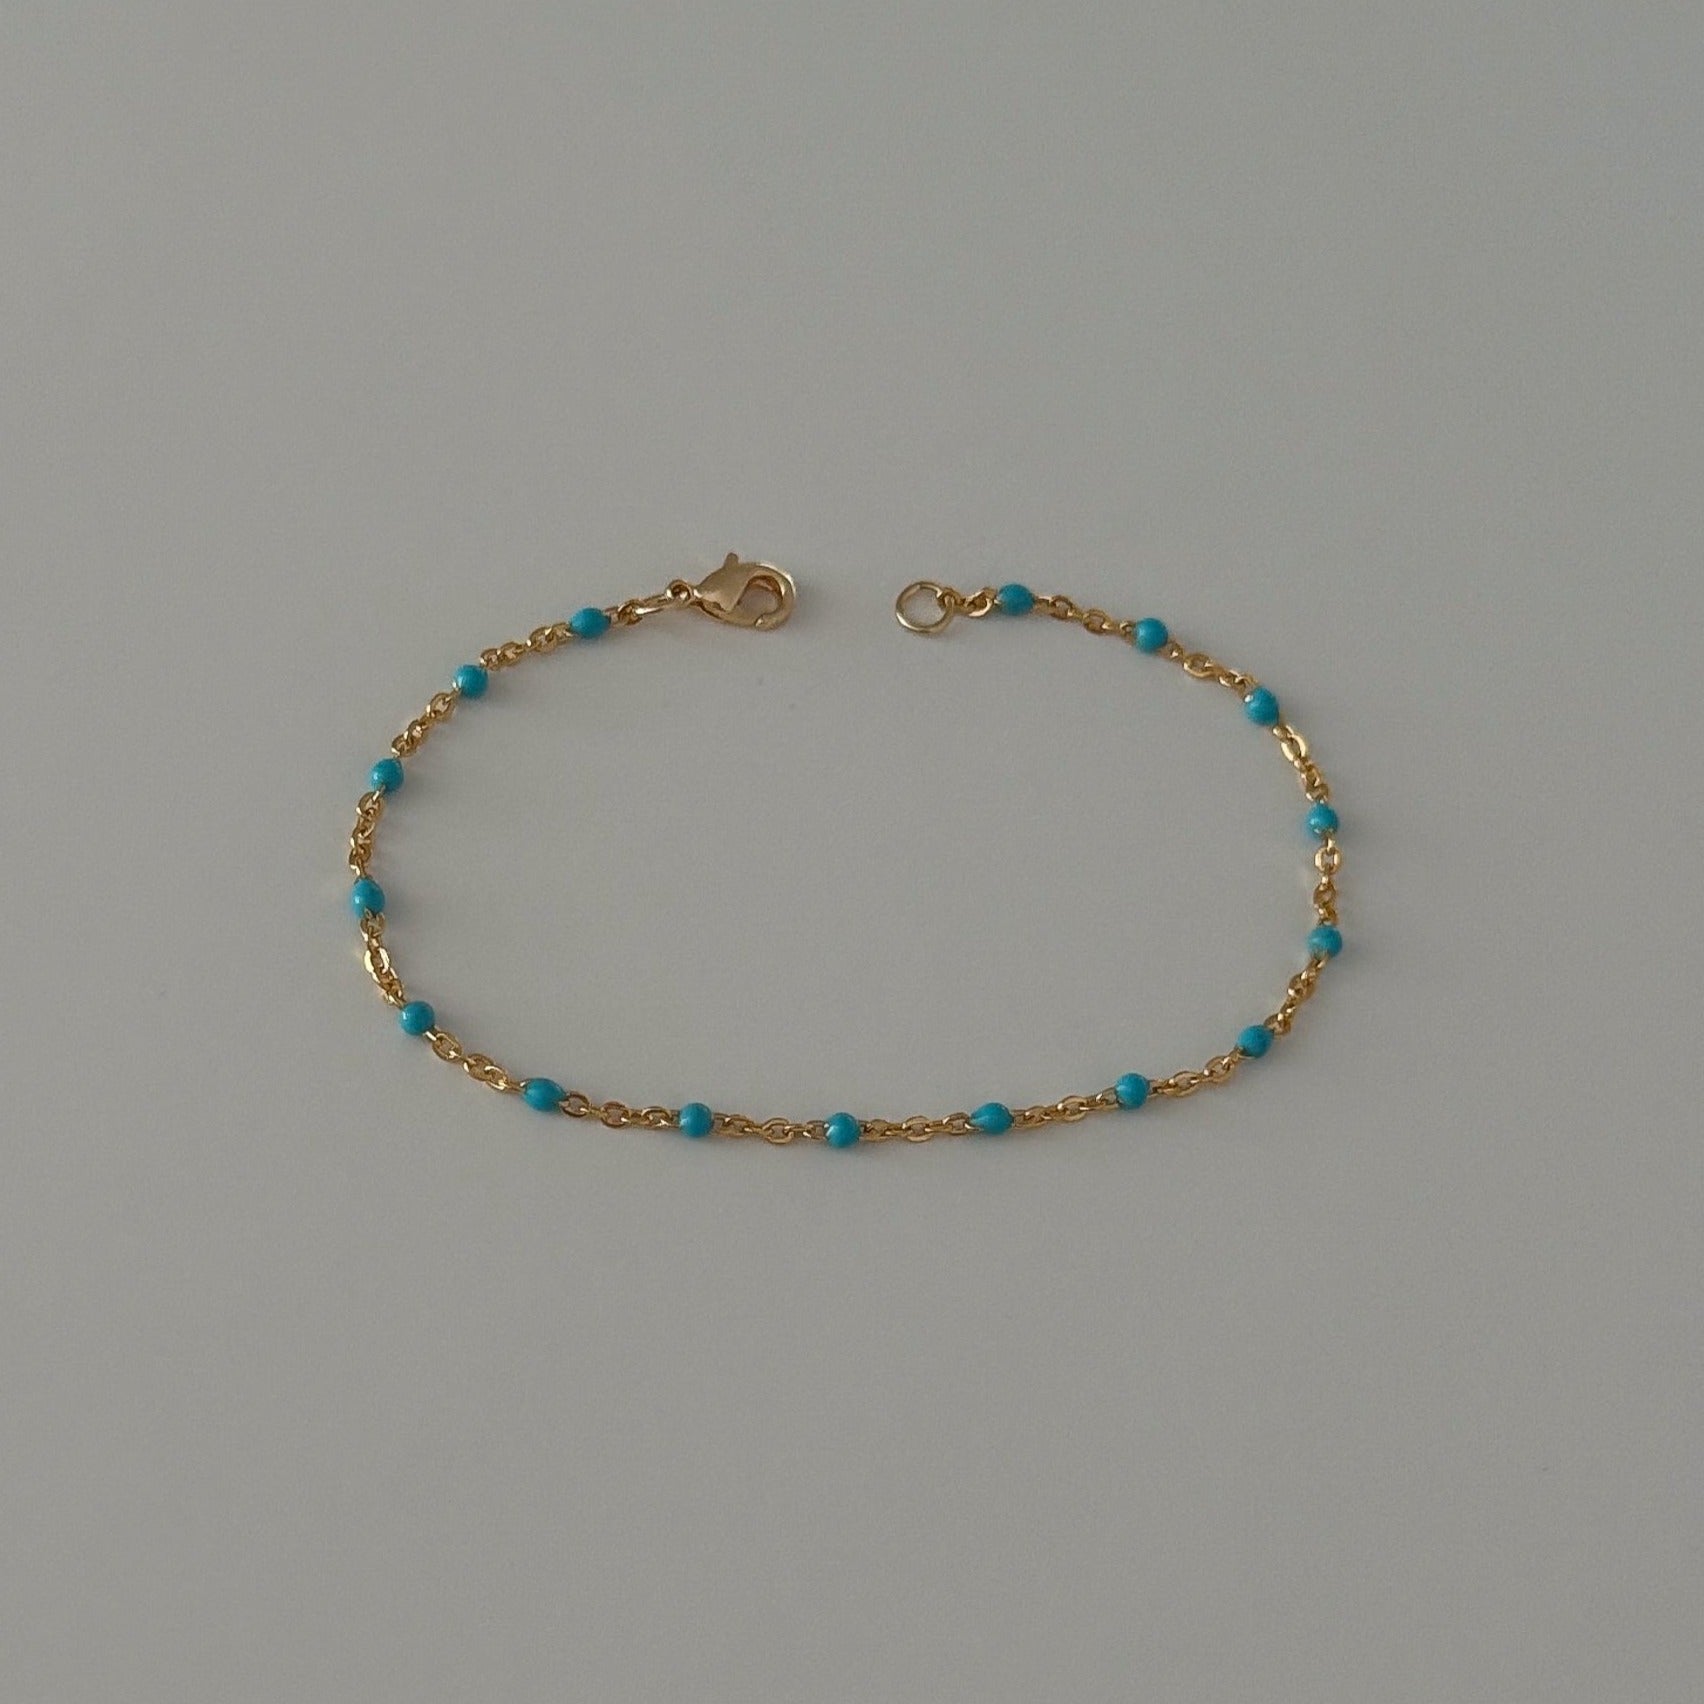 Dainty beaded bracelet crafted from gold filled satellite enamel chain.